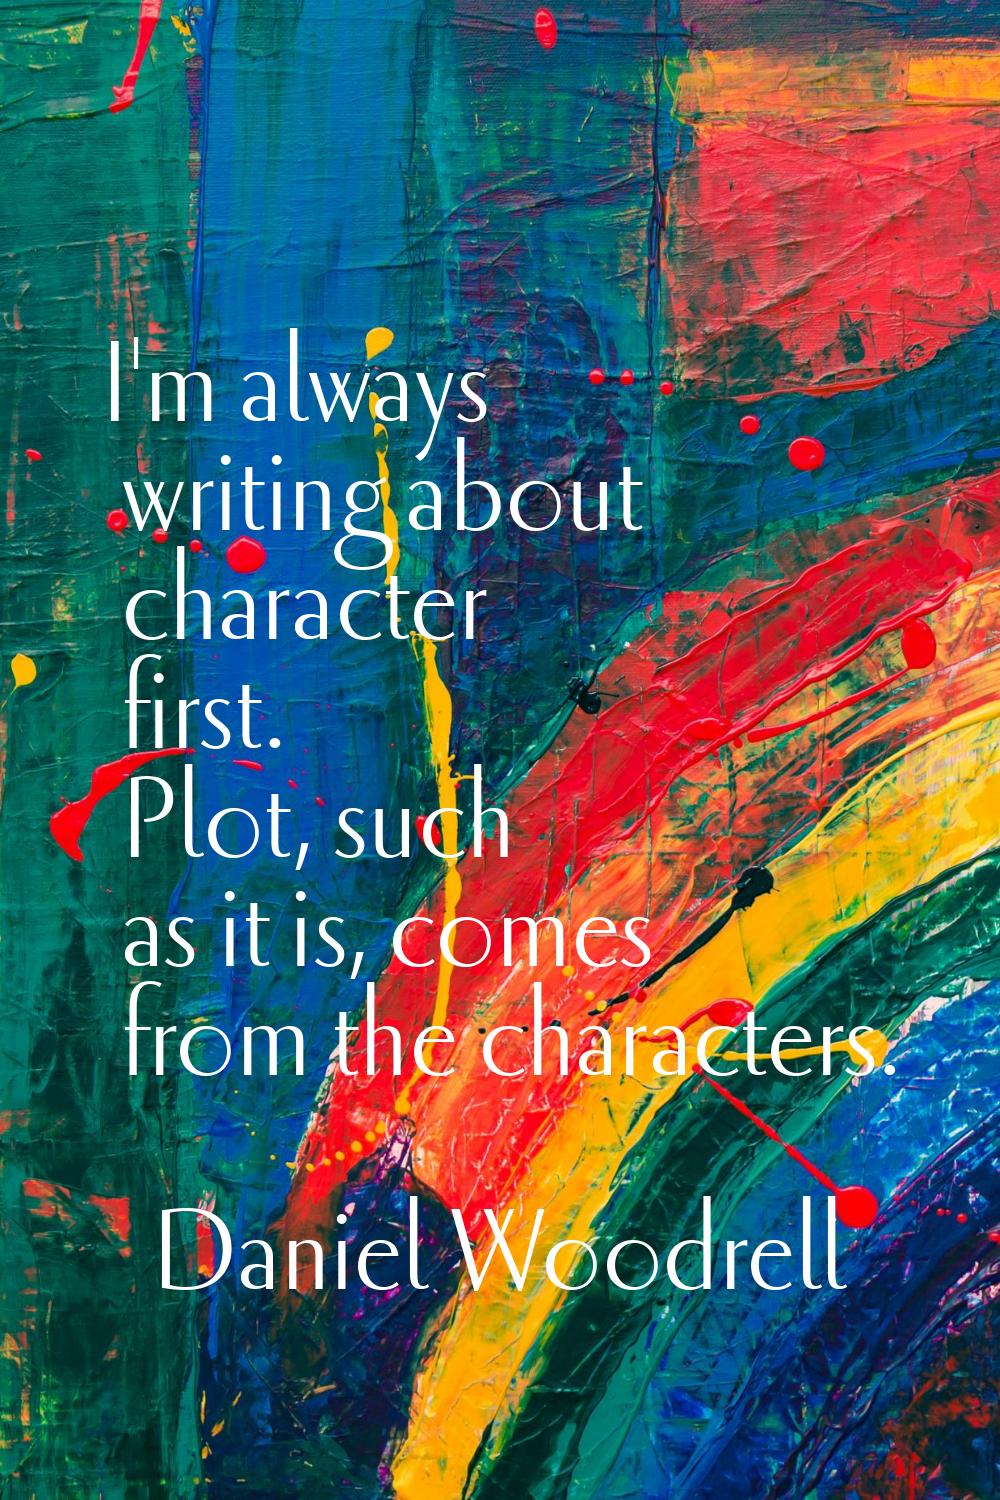 I'm always writing about character first. Plot, such as it is, comes from the characters.